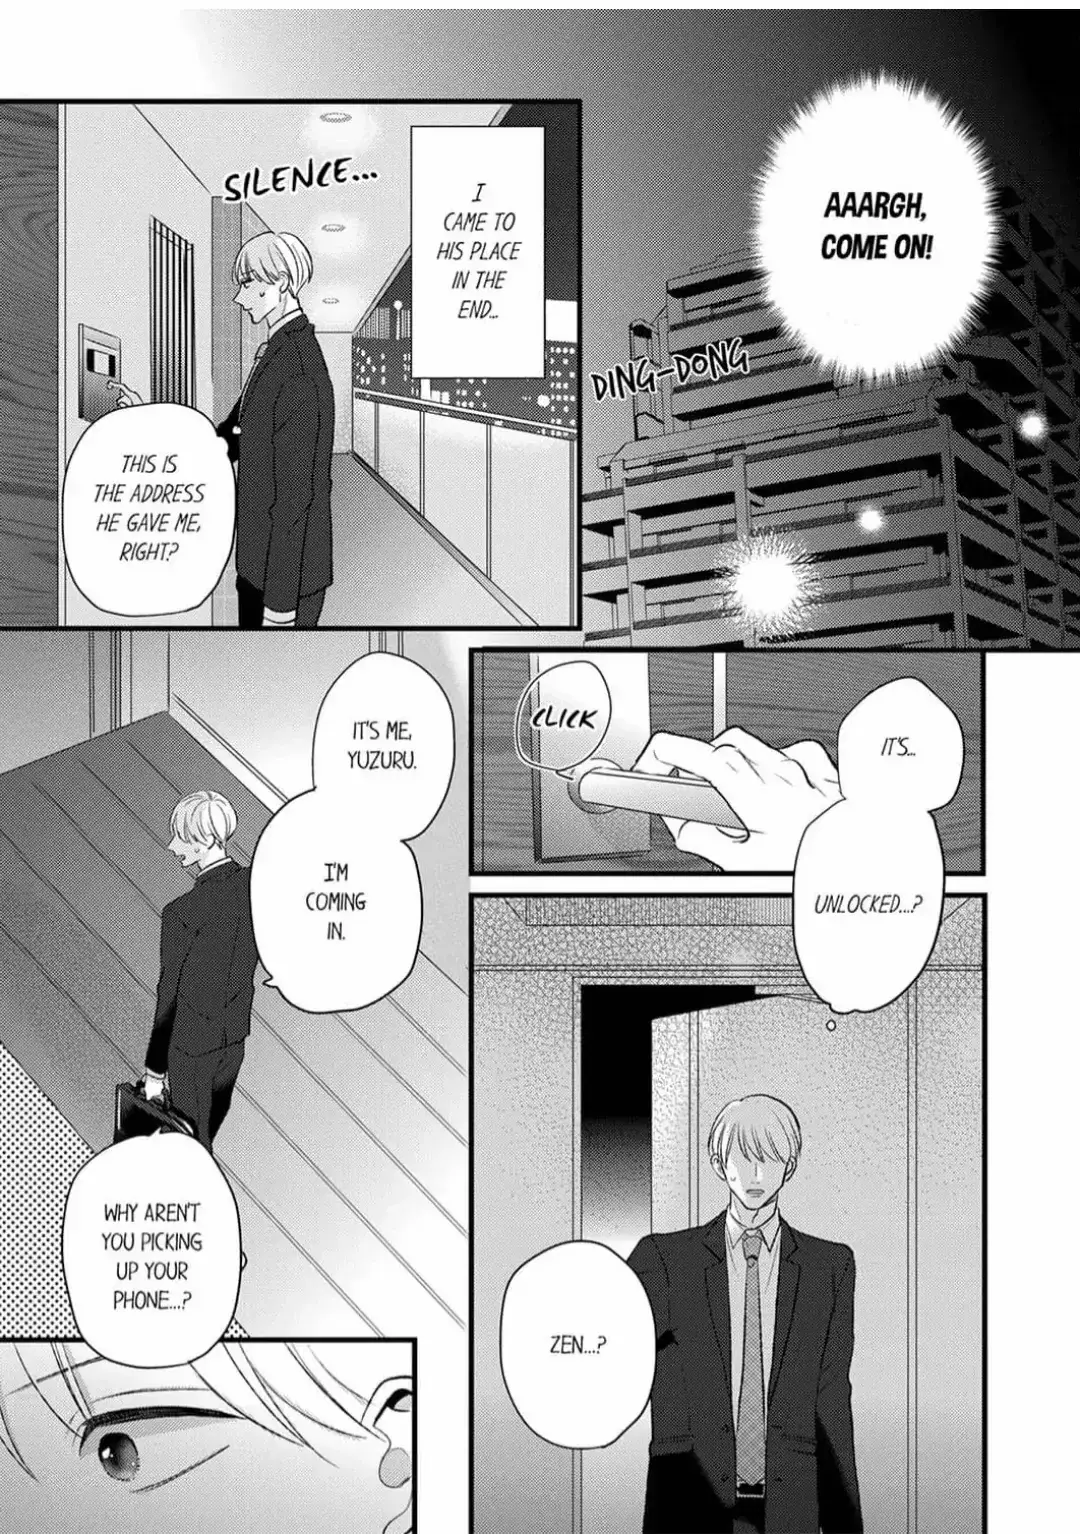 Broken-Hearted One-Night Love ~This Man Is Cunning And Sweet~ - 3 page 5-9da088b2